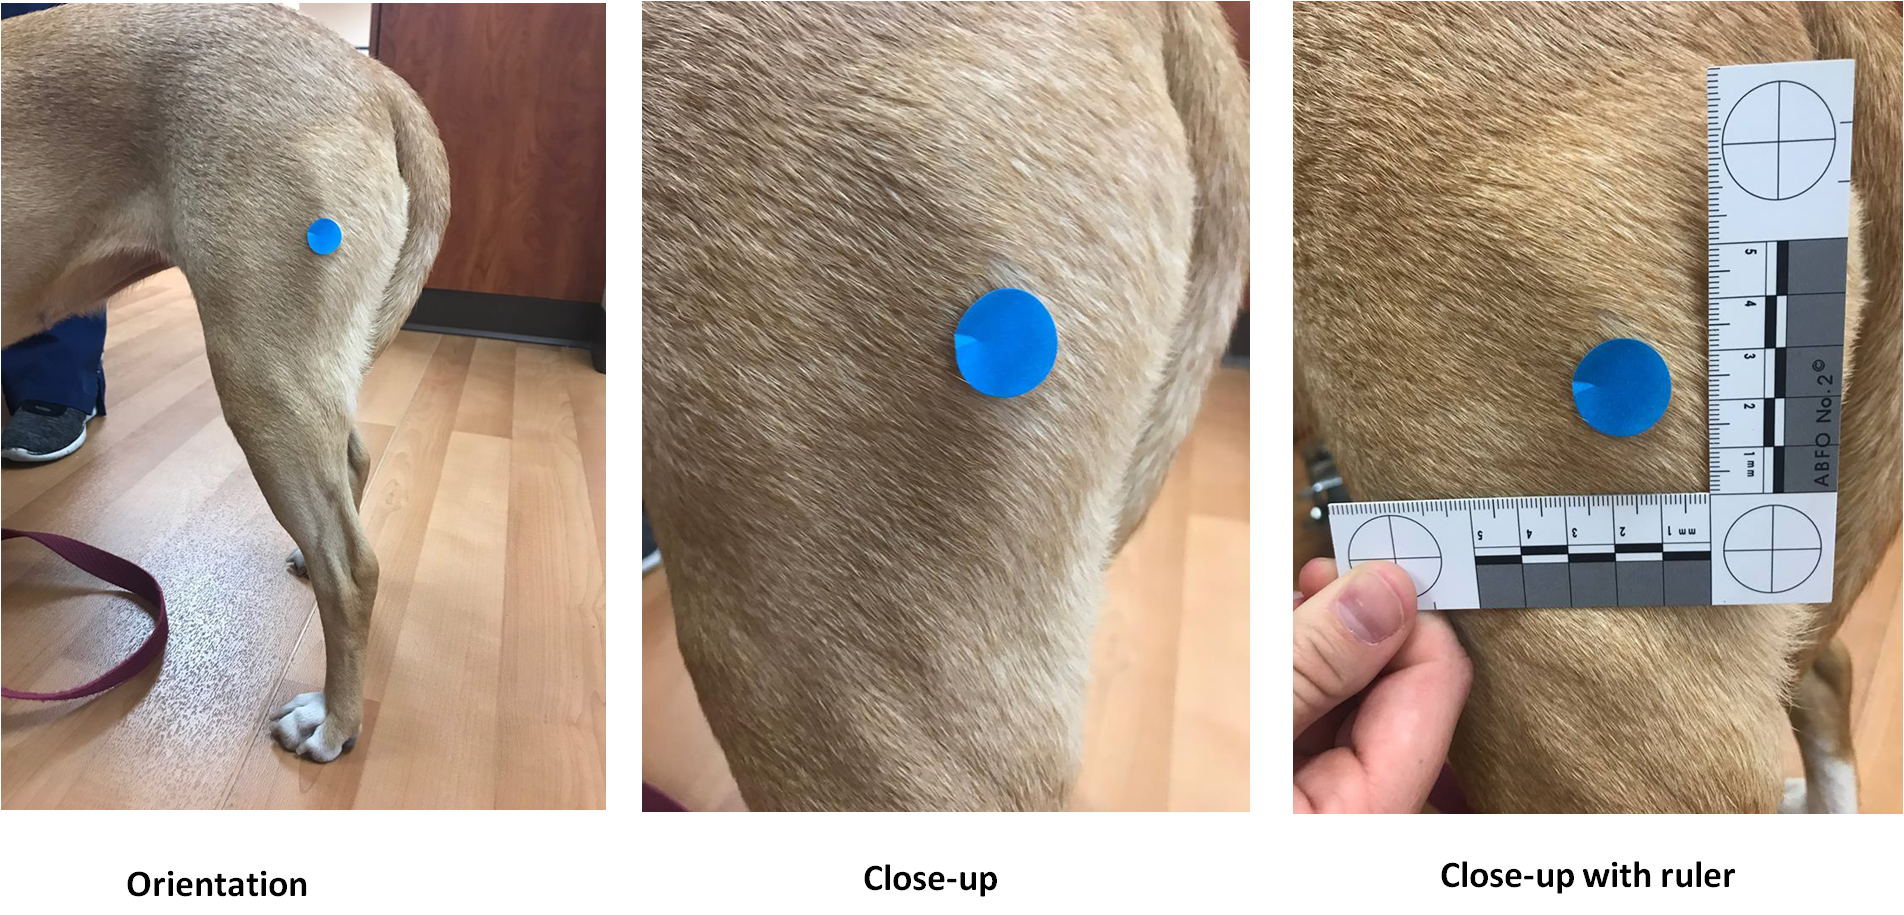 Orientation, close-up without ruler, and close-up with ruler photographs of a lesion on a dog’s left hind leg